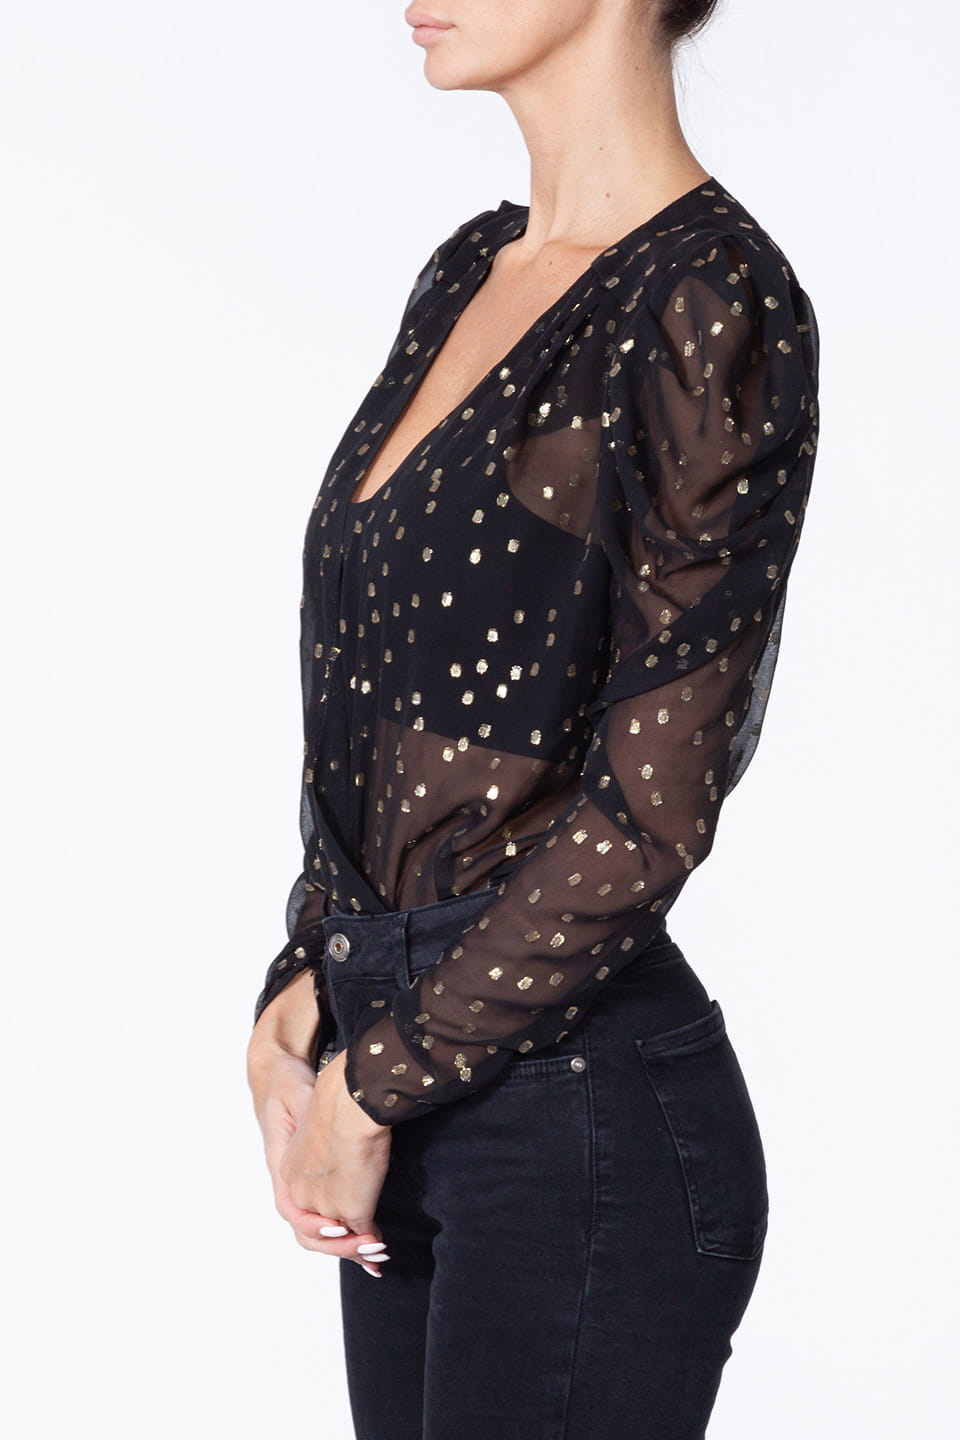 Thumbnail for Product gallery 2, Buy Nima Black Body Blouse 